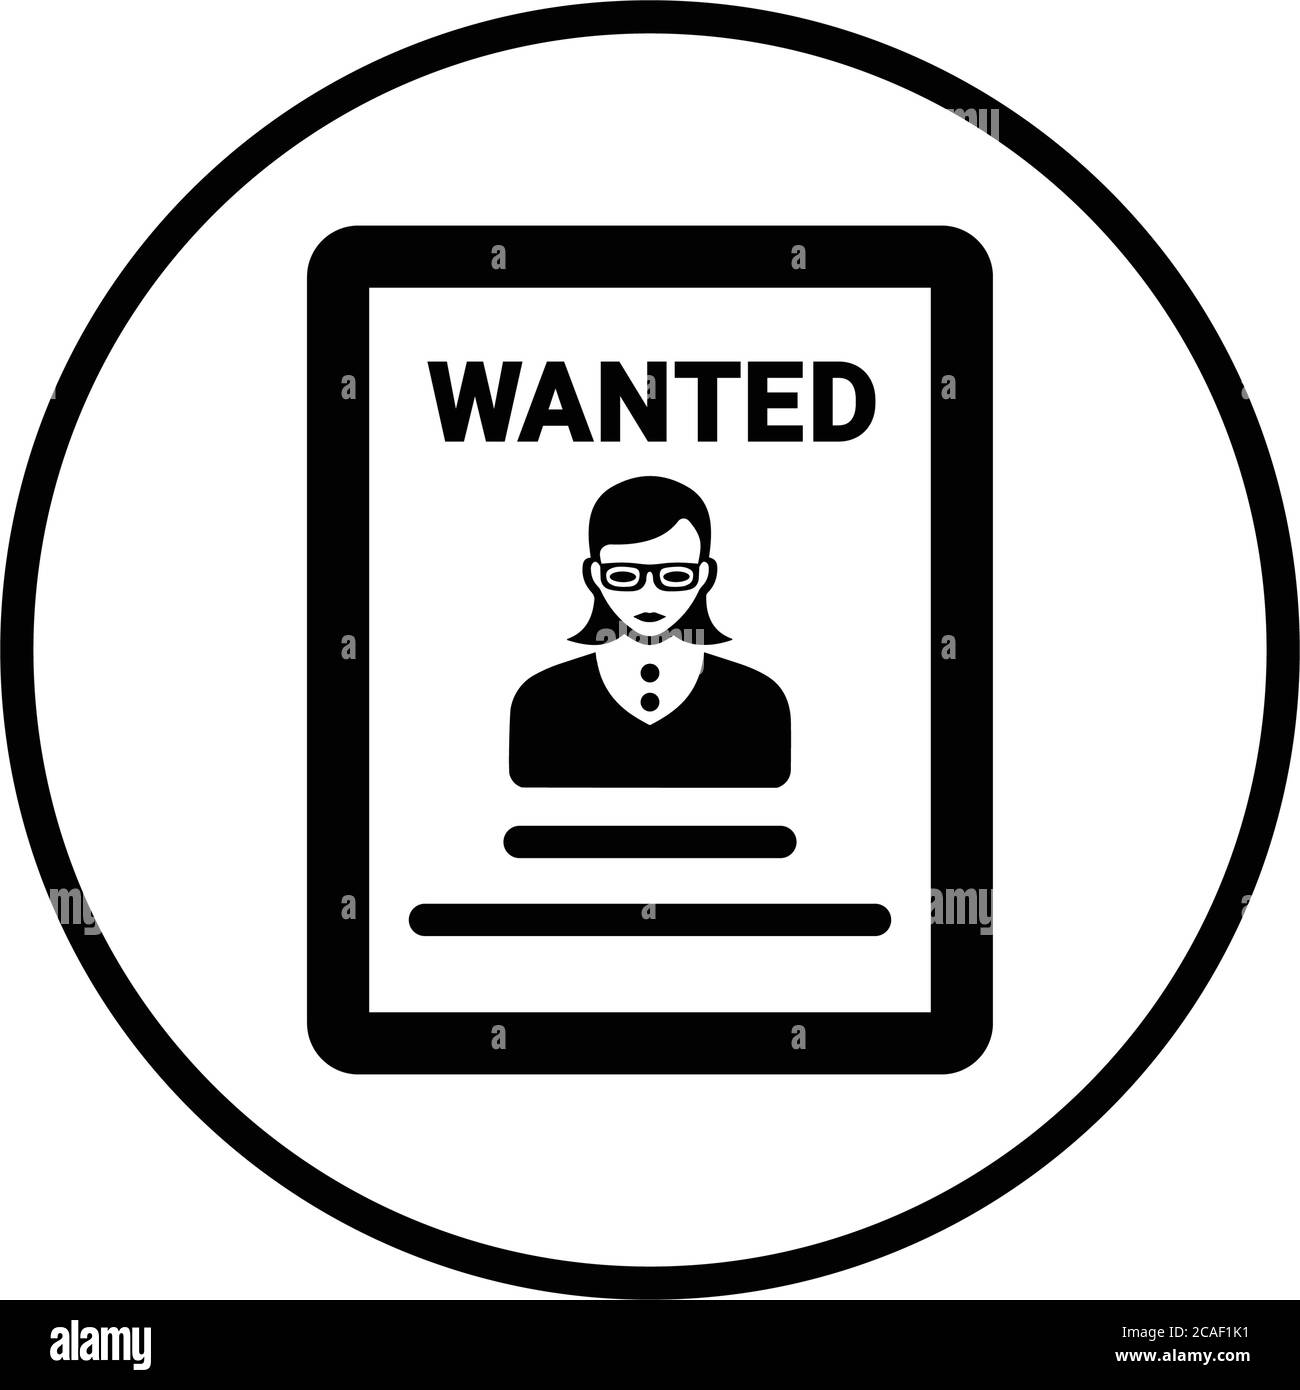 Poster, wanted person icon. Perfect for use in designing and developing websites, printed files and presentations, stock images, Promotional Materials Stock Vector